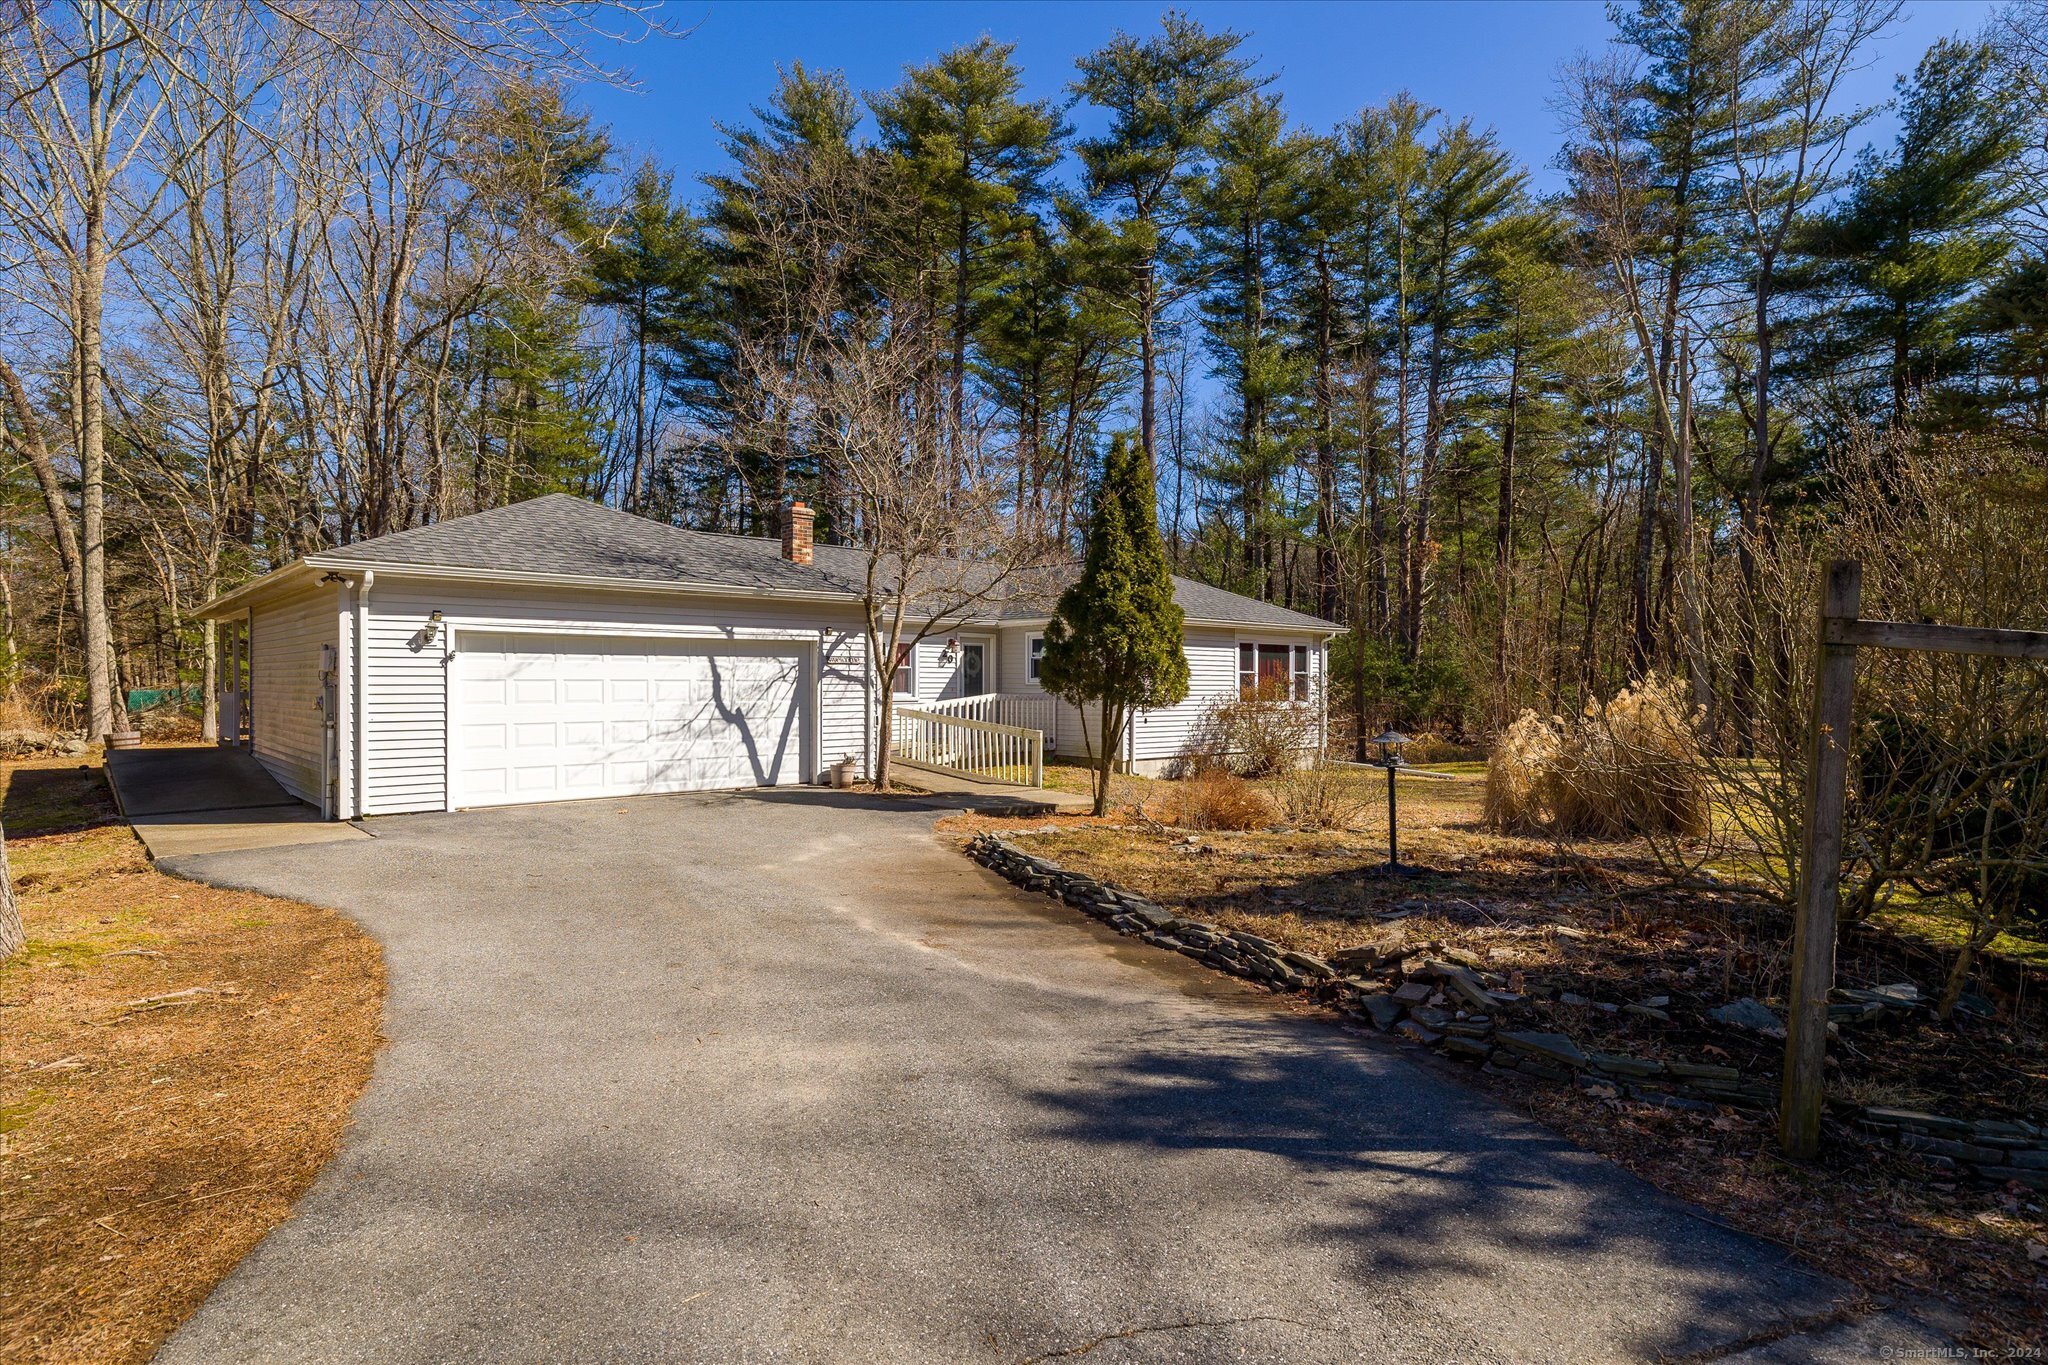 20 Kenneth Drive, Killingly, CT 06241